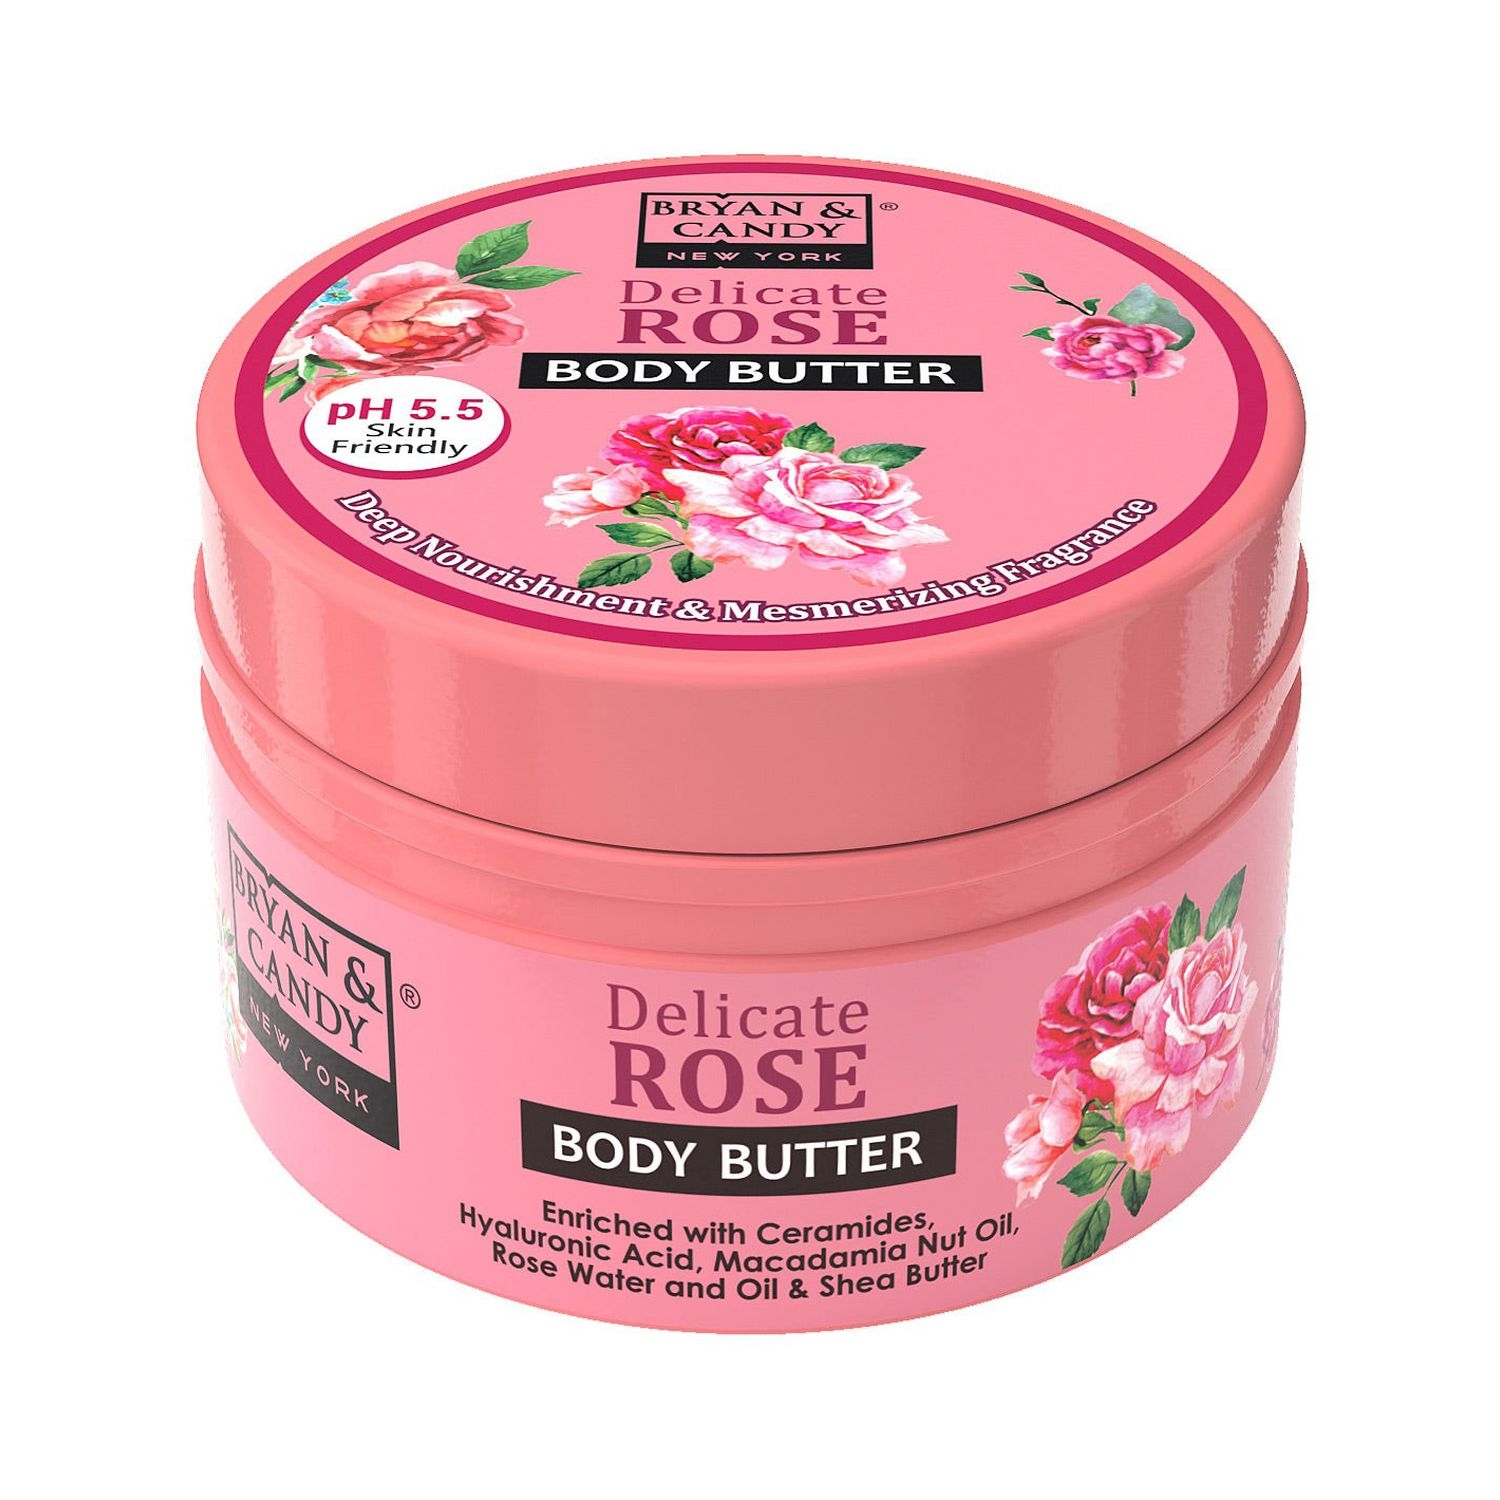 BRYAN & CANDY | BRYAN & CANDY Delicate Rose Body Butter (200g)